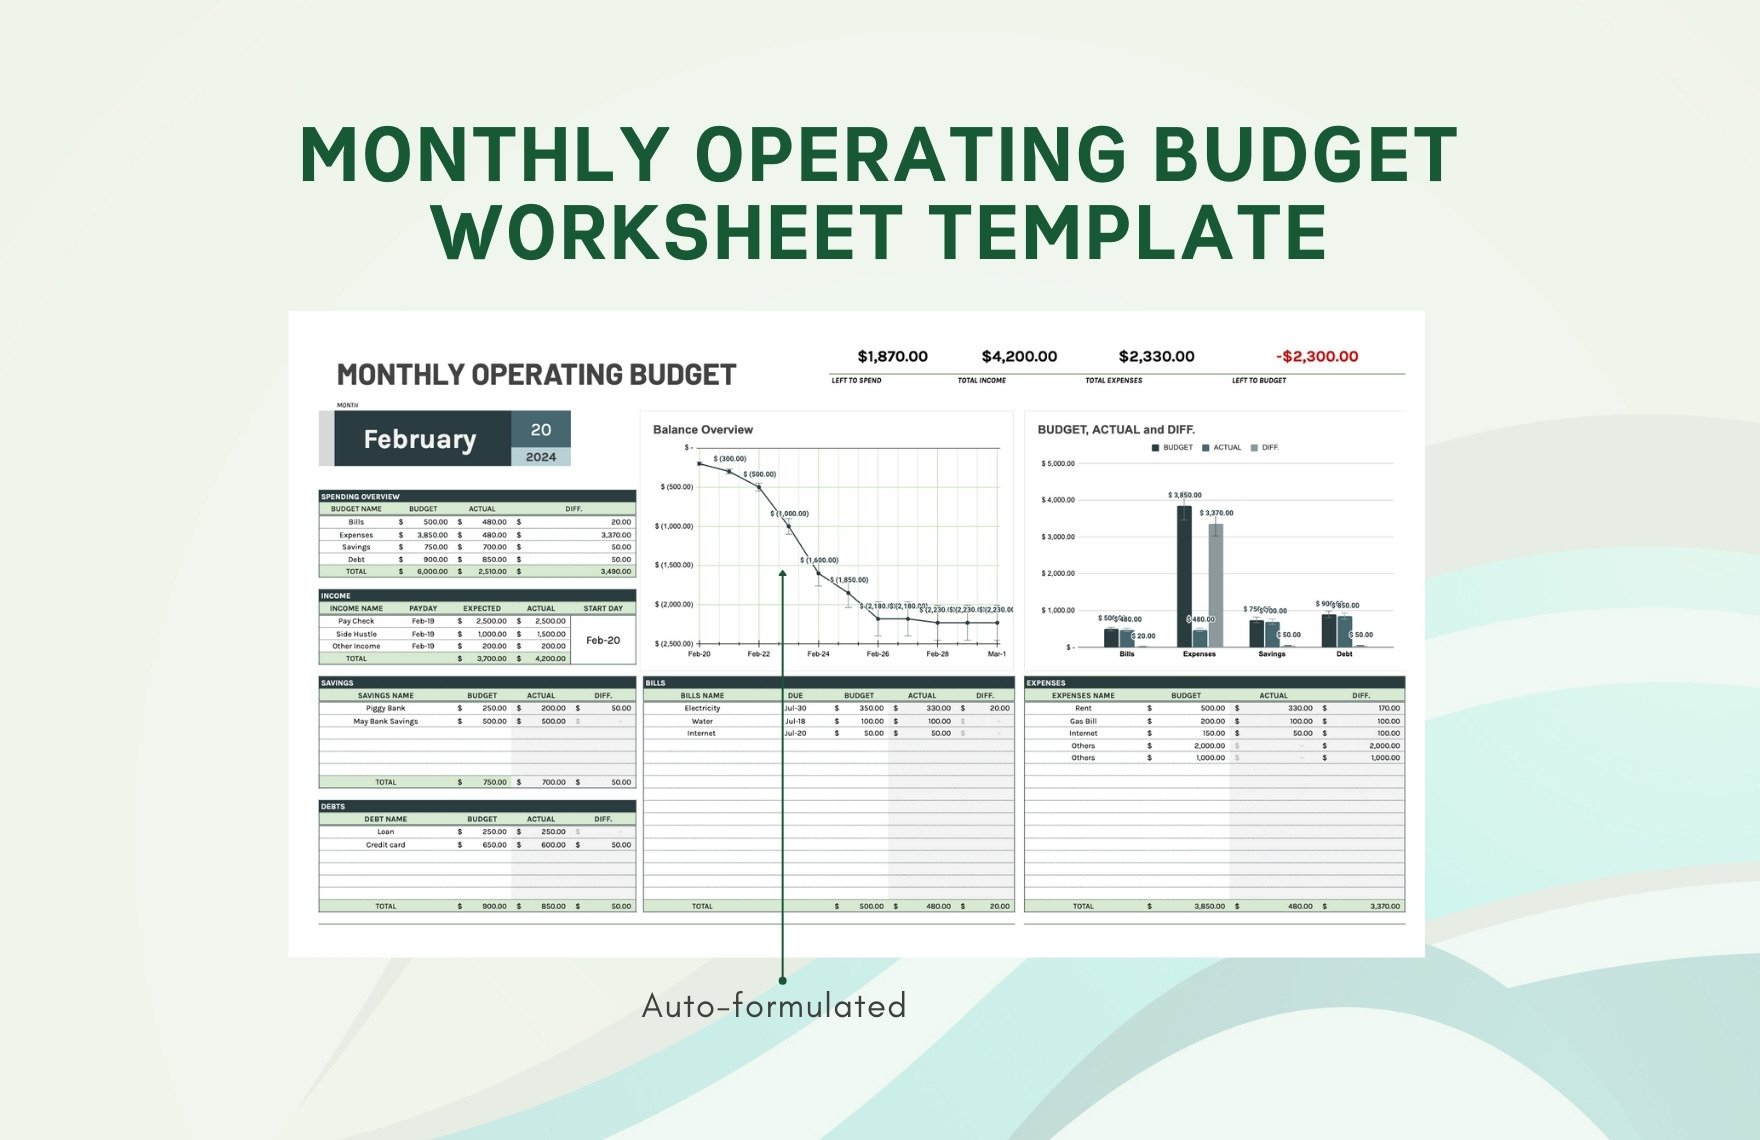 Monthly Operating Budget Worksheet Template